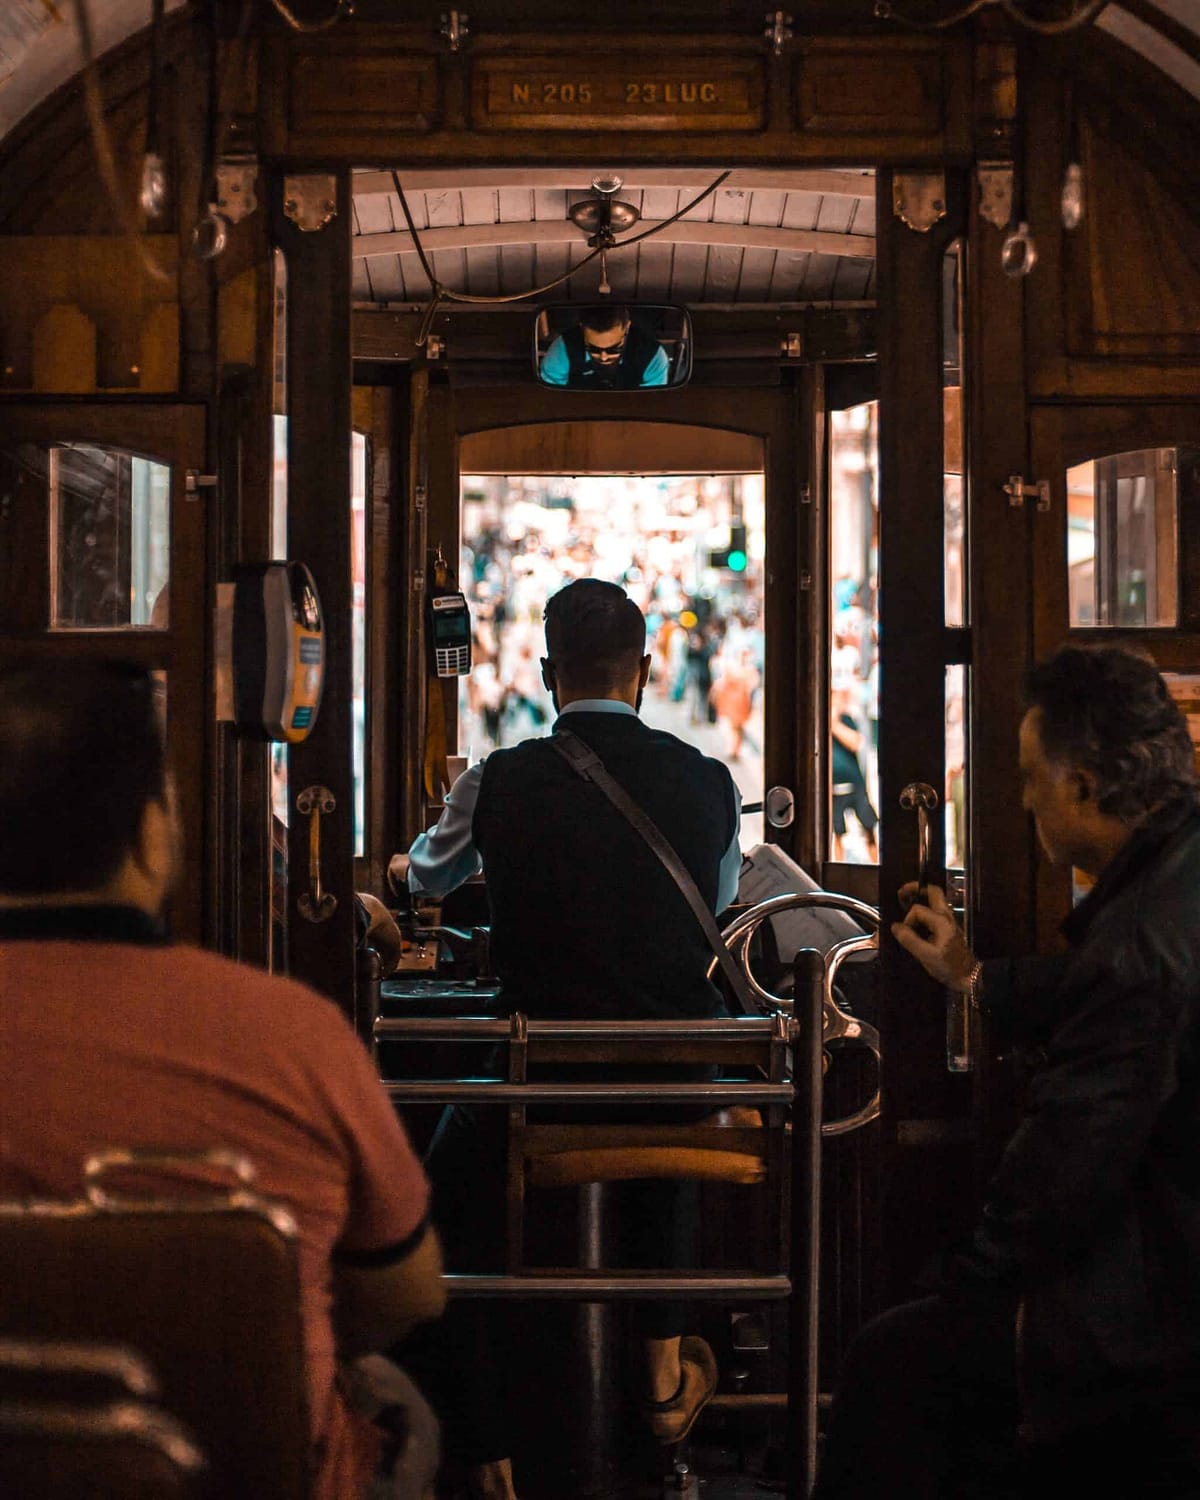 Taking the tram 28 in Lisbon is one of the small pleasures of everyday life for the inhabitants